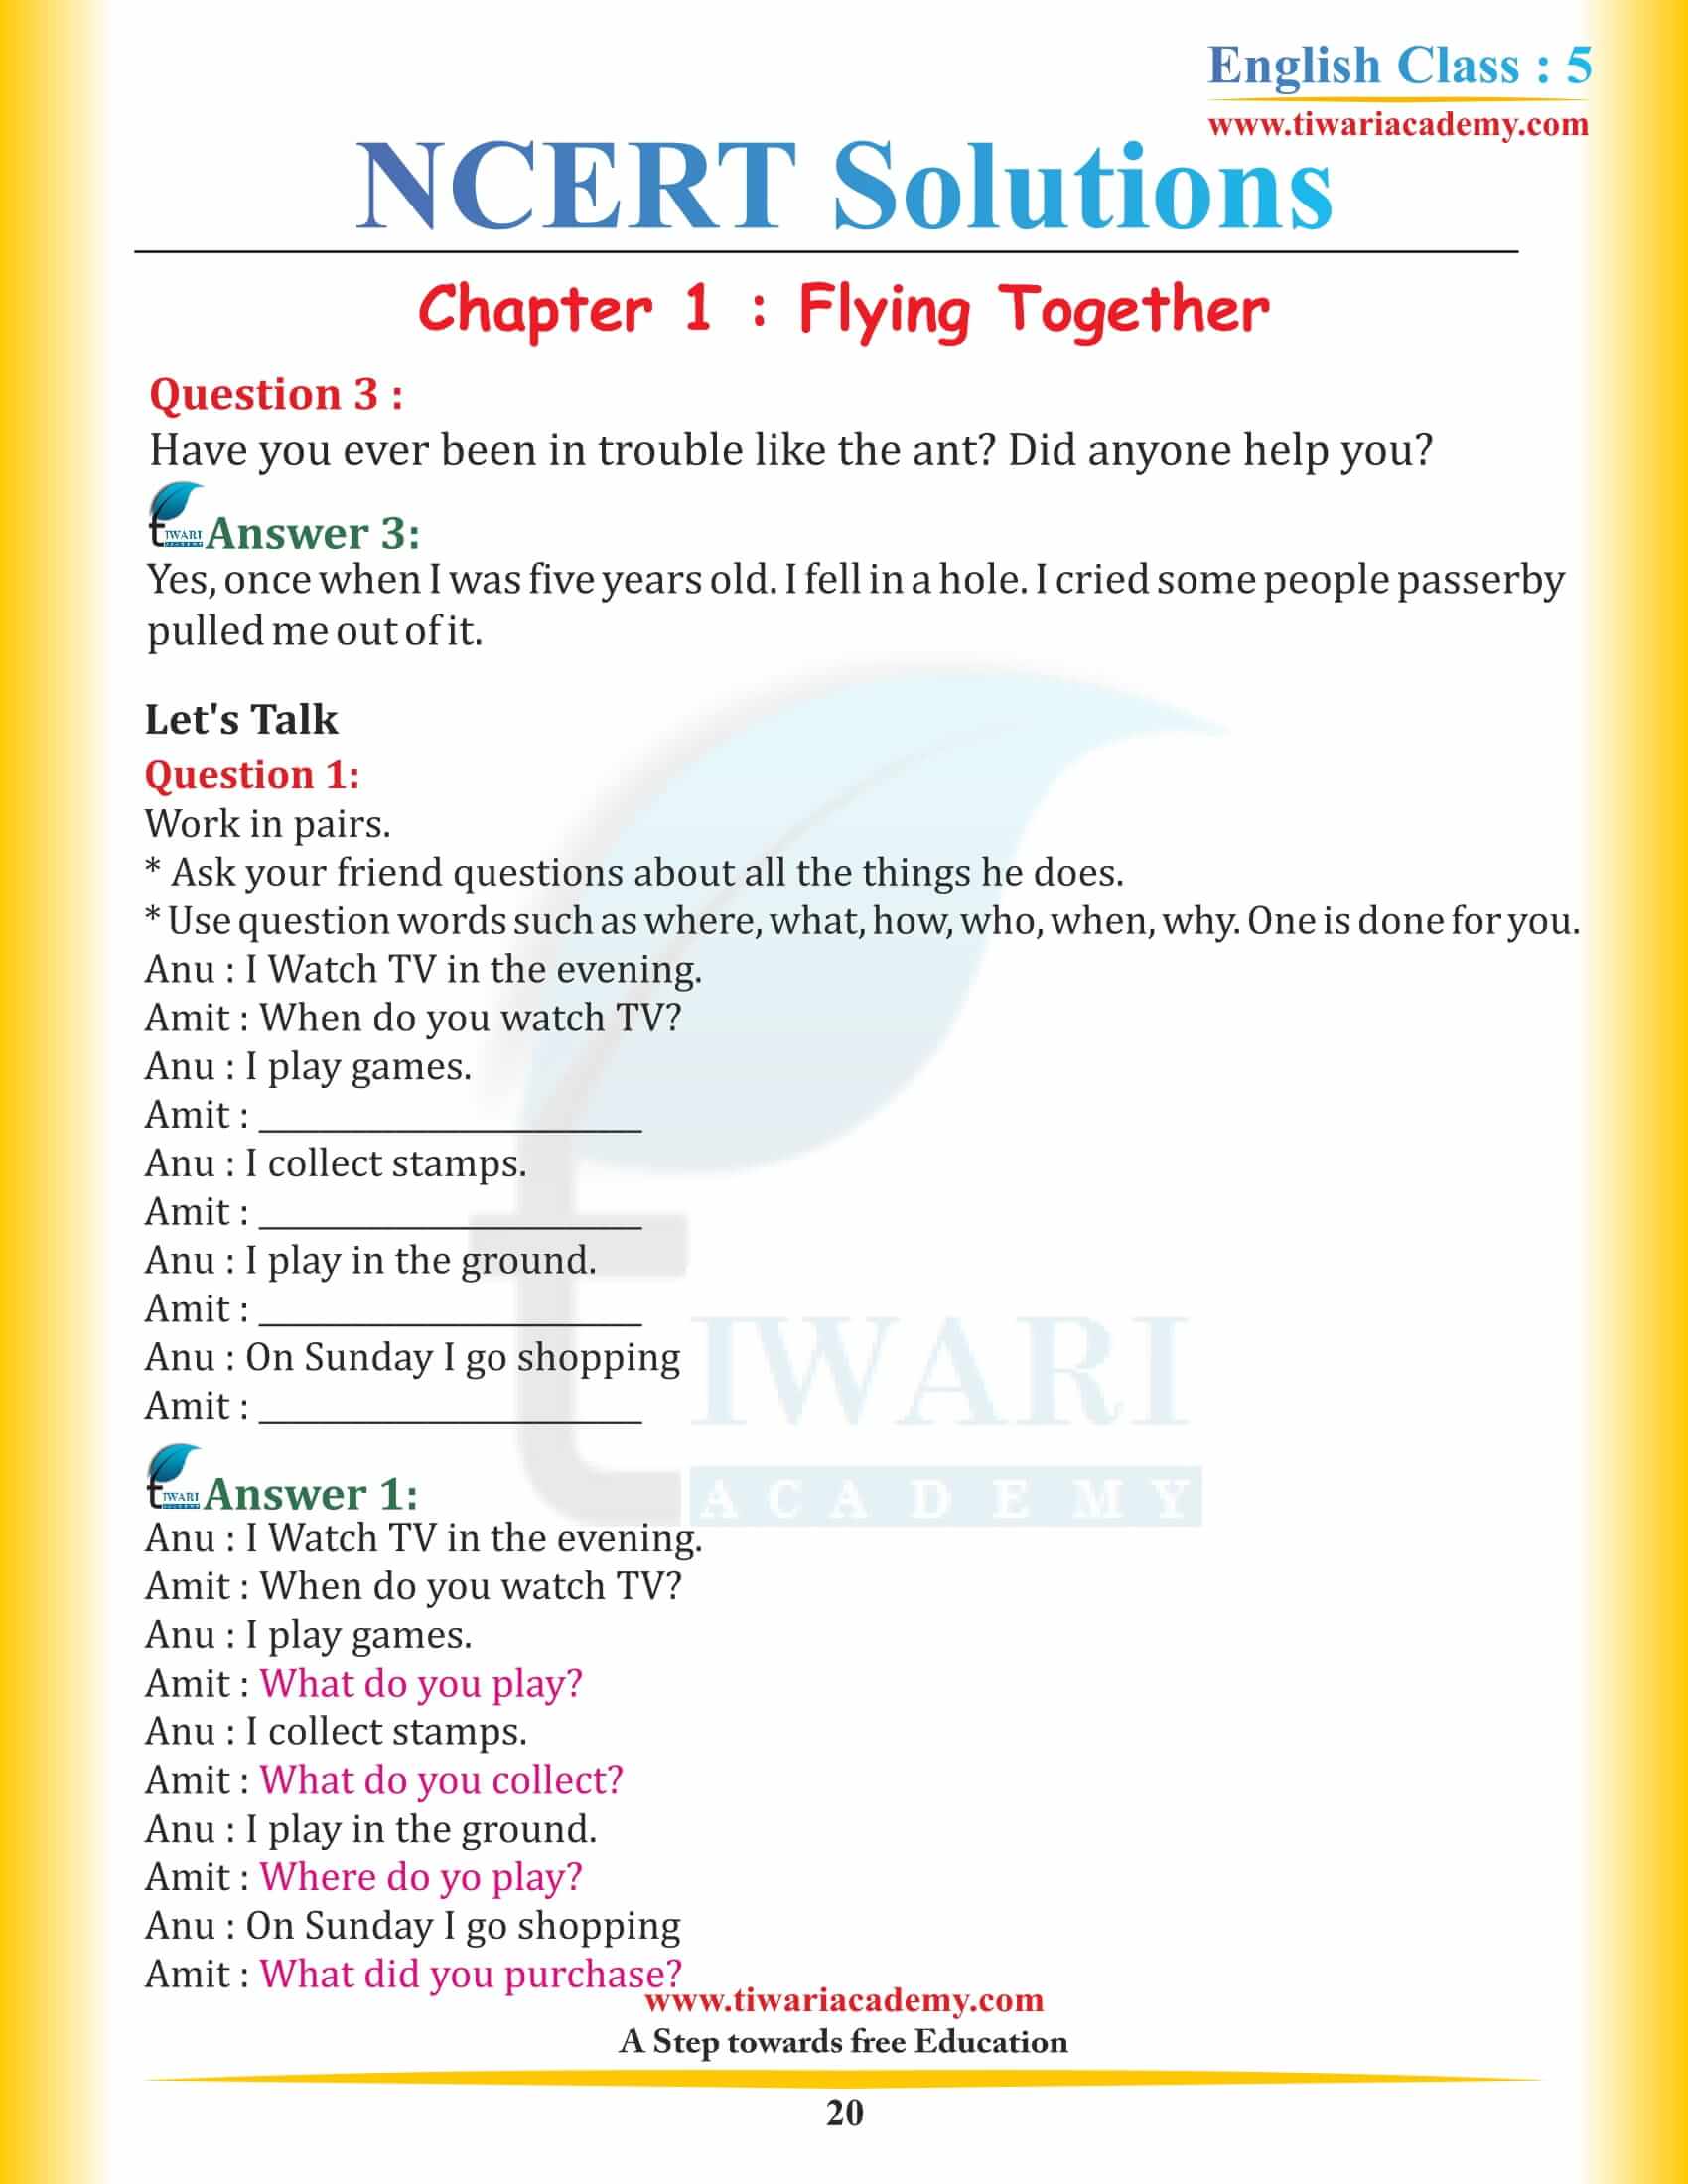 Class 5 English Chapter 1 Flying Together NCERT Solutions PDF